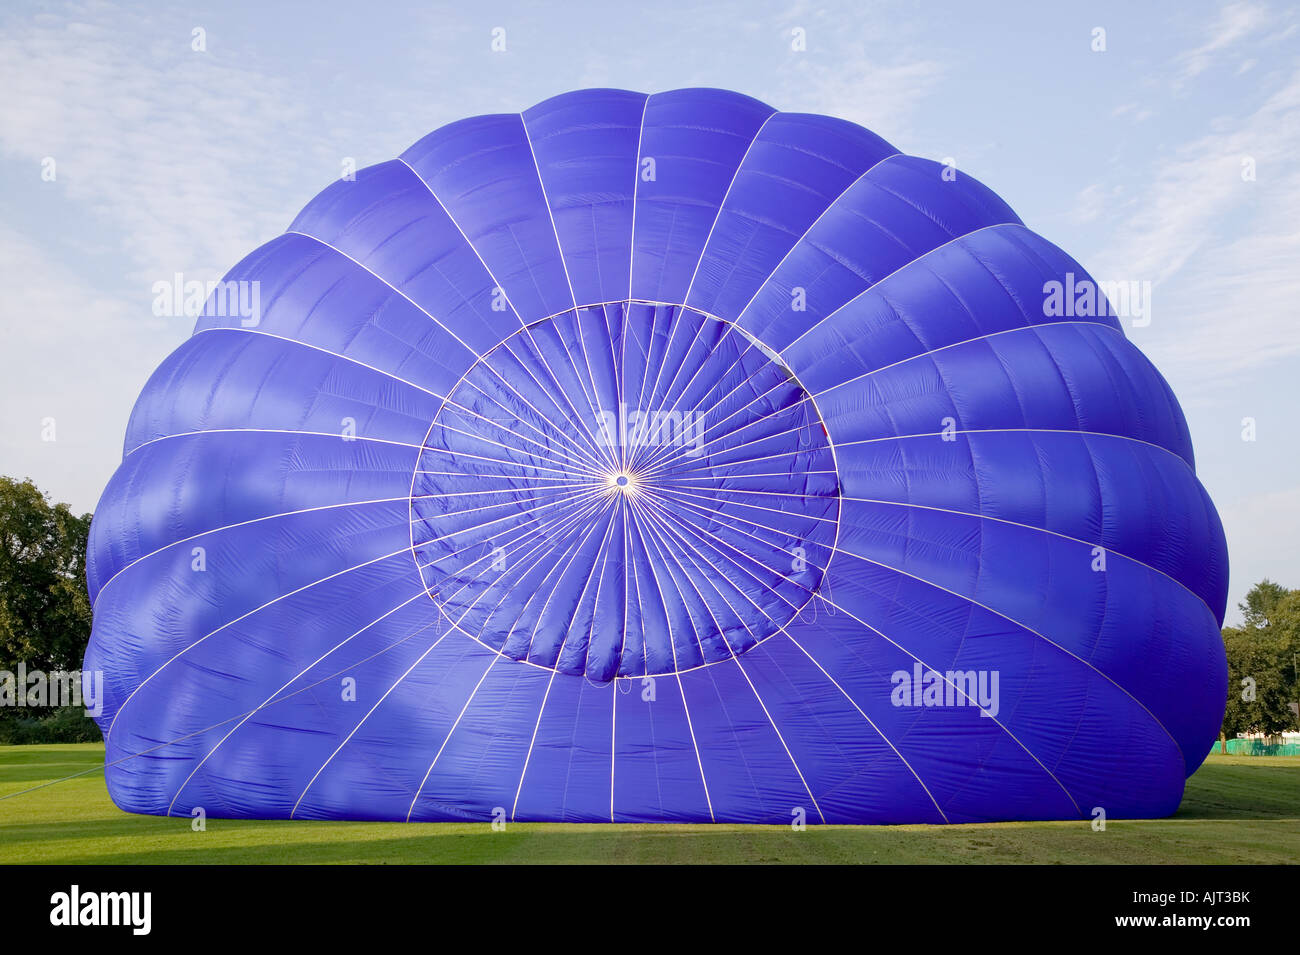 Hot air balloon being inflated on the ground Stock Photo